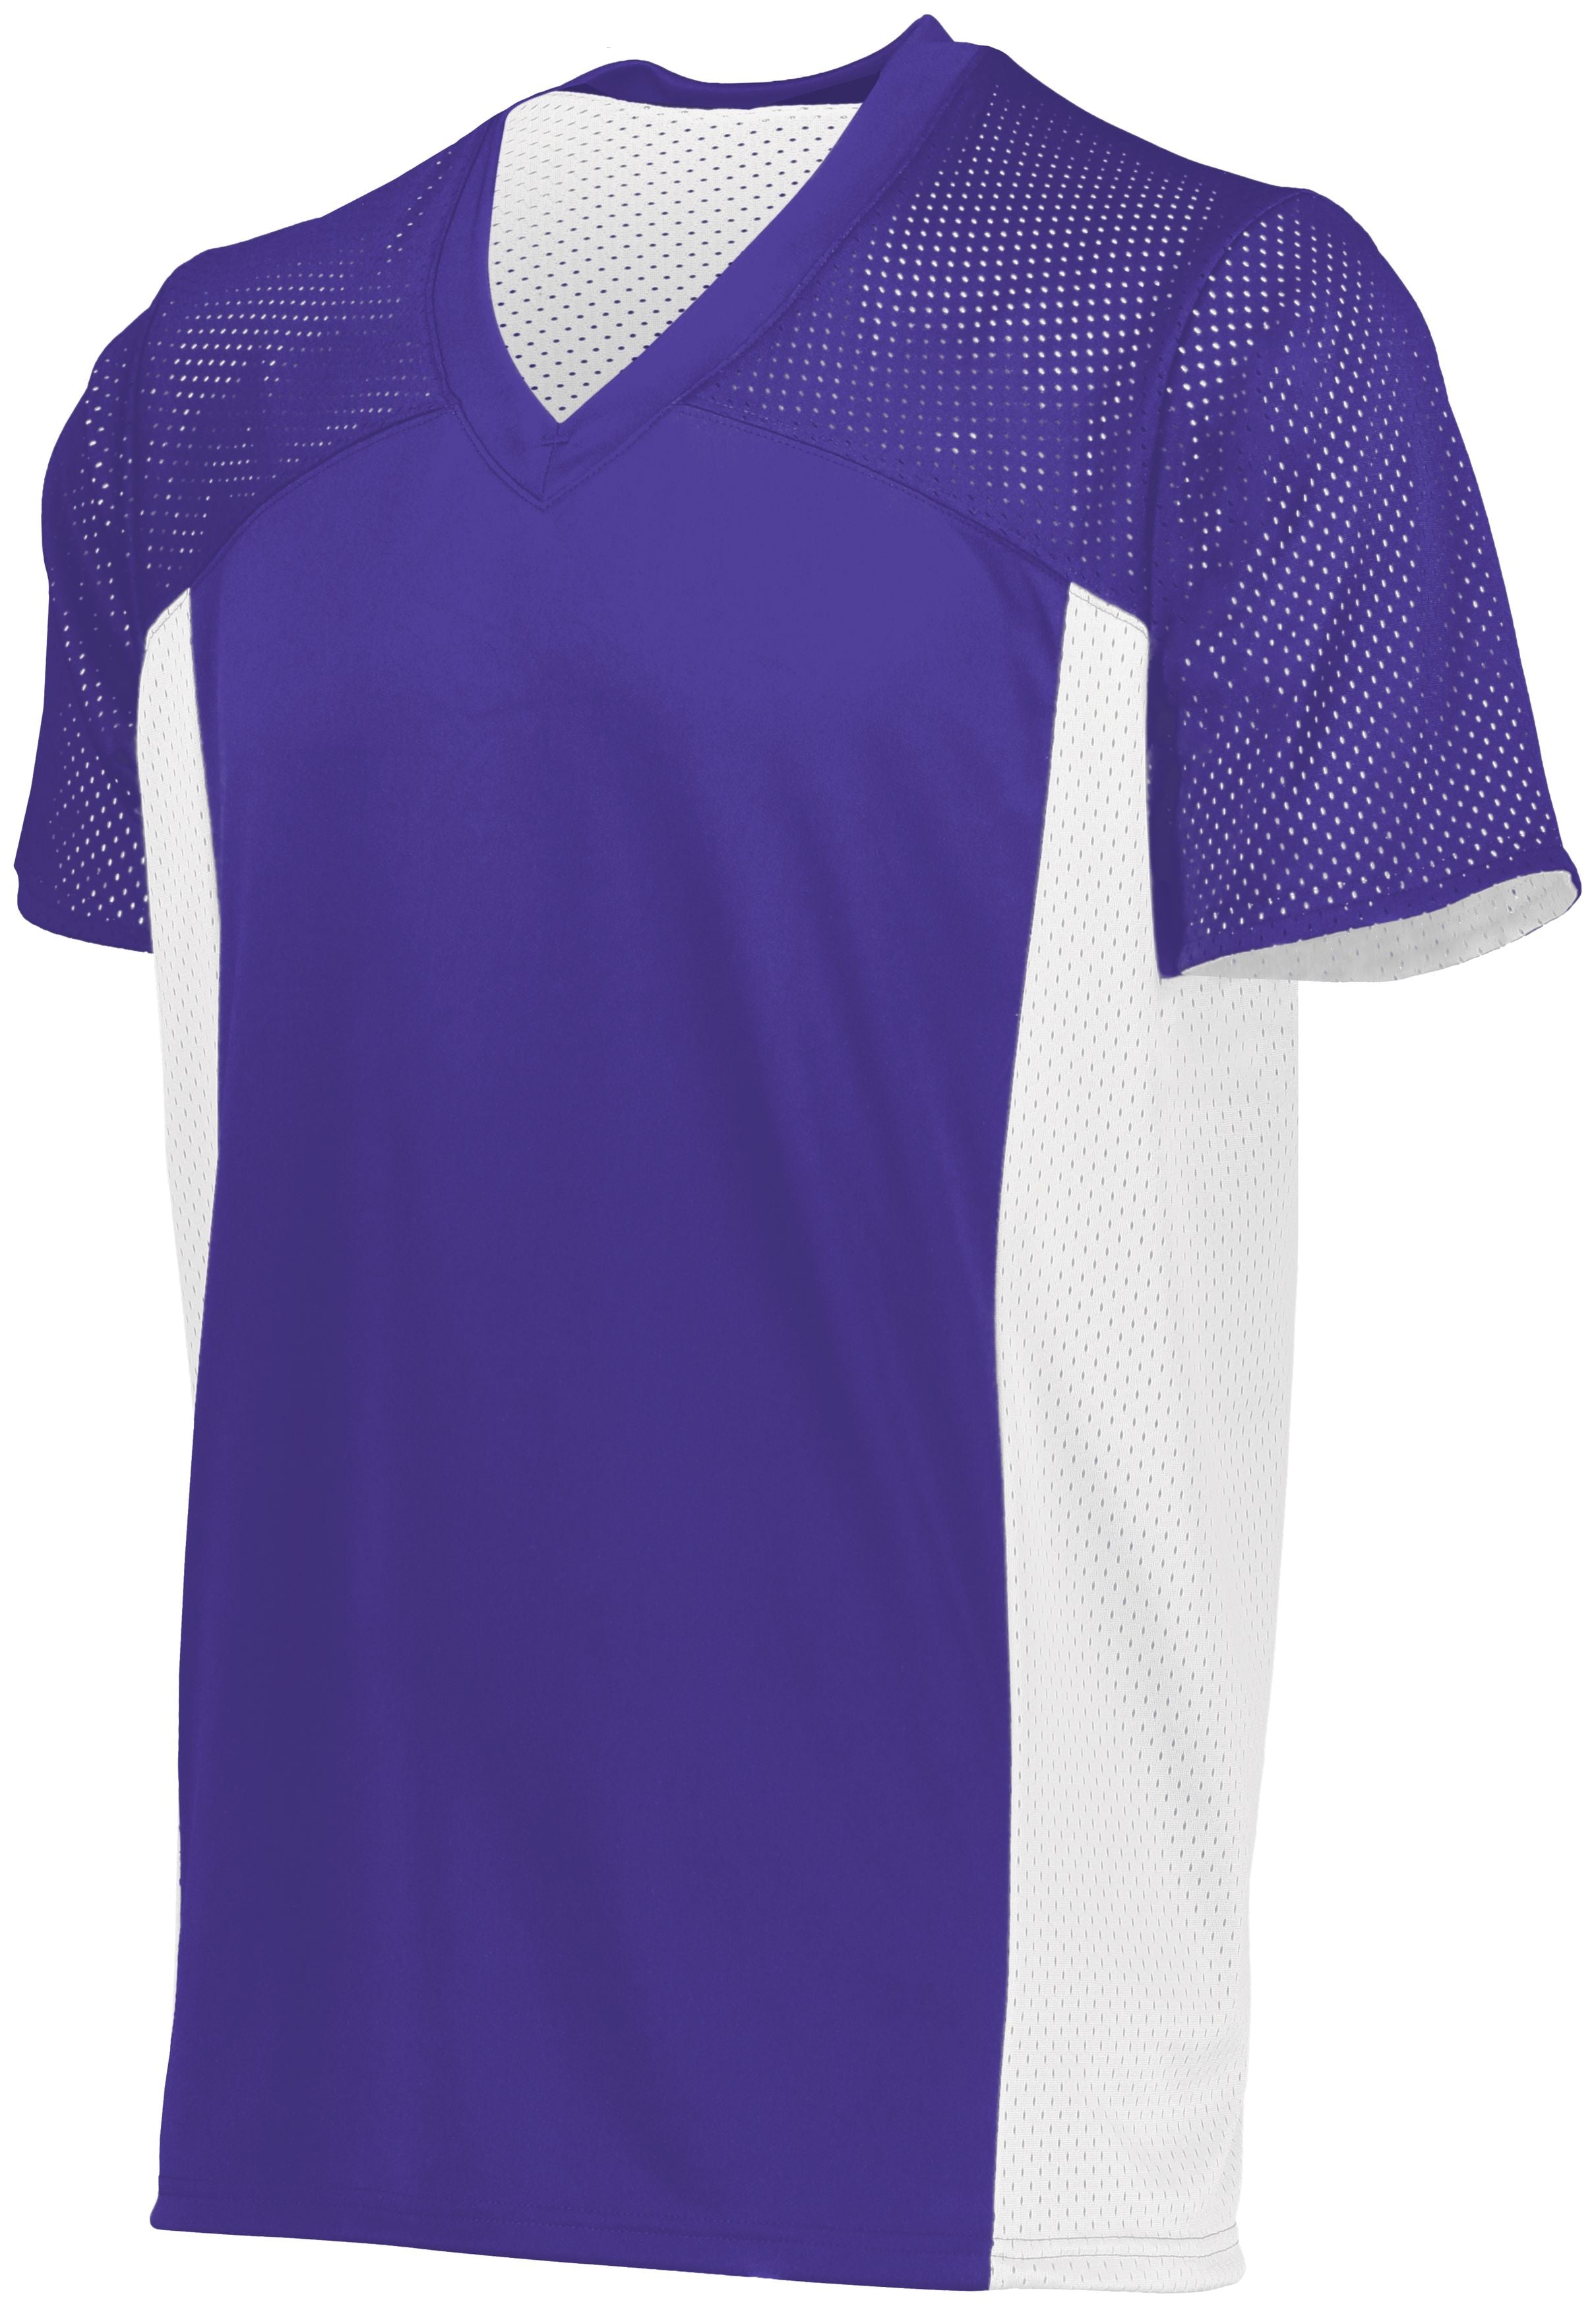 Youth Reversible Flag Football Jersey 265